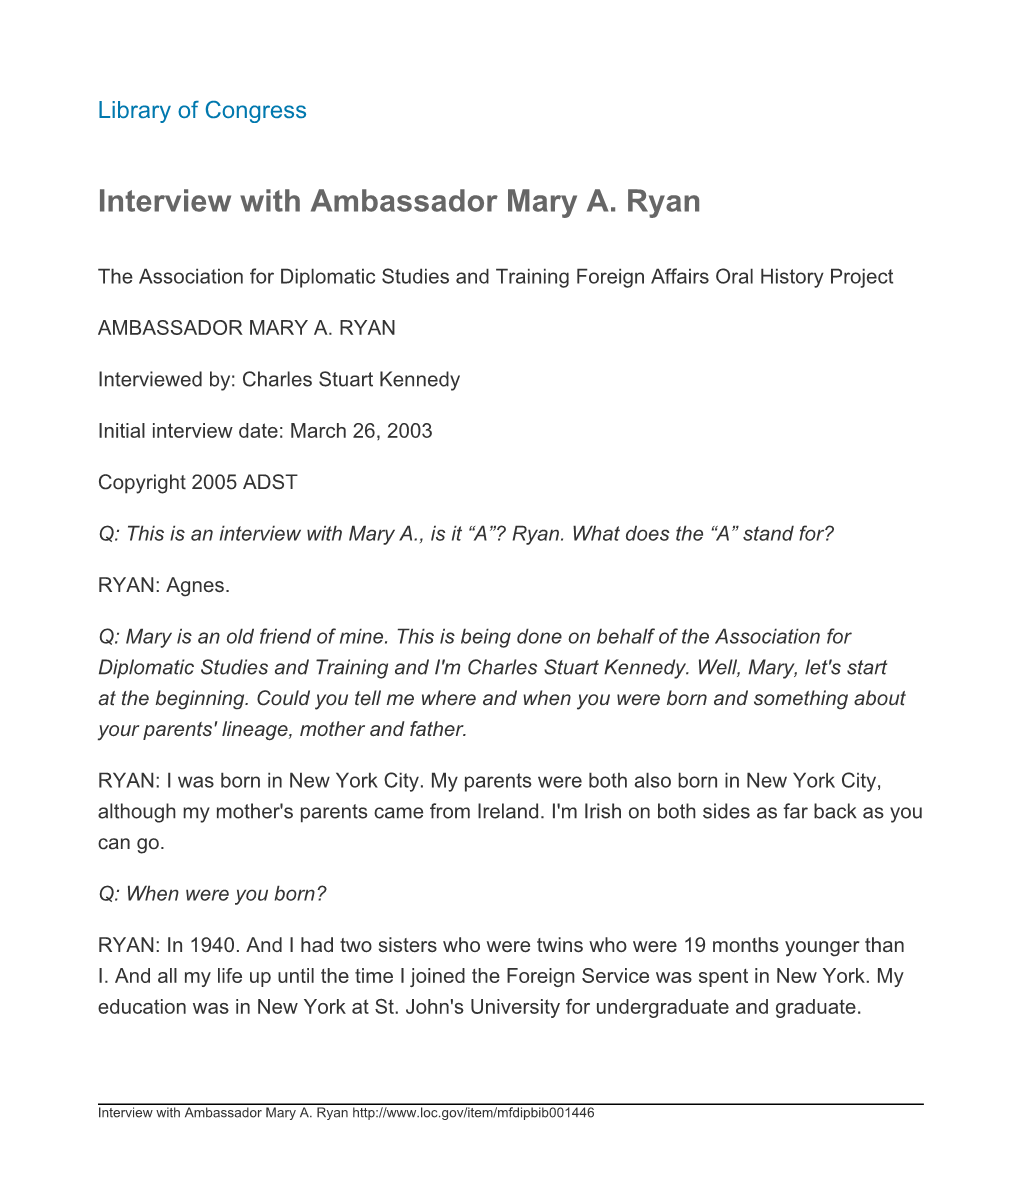 Interview with Ambassador Mary A. Ryan